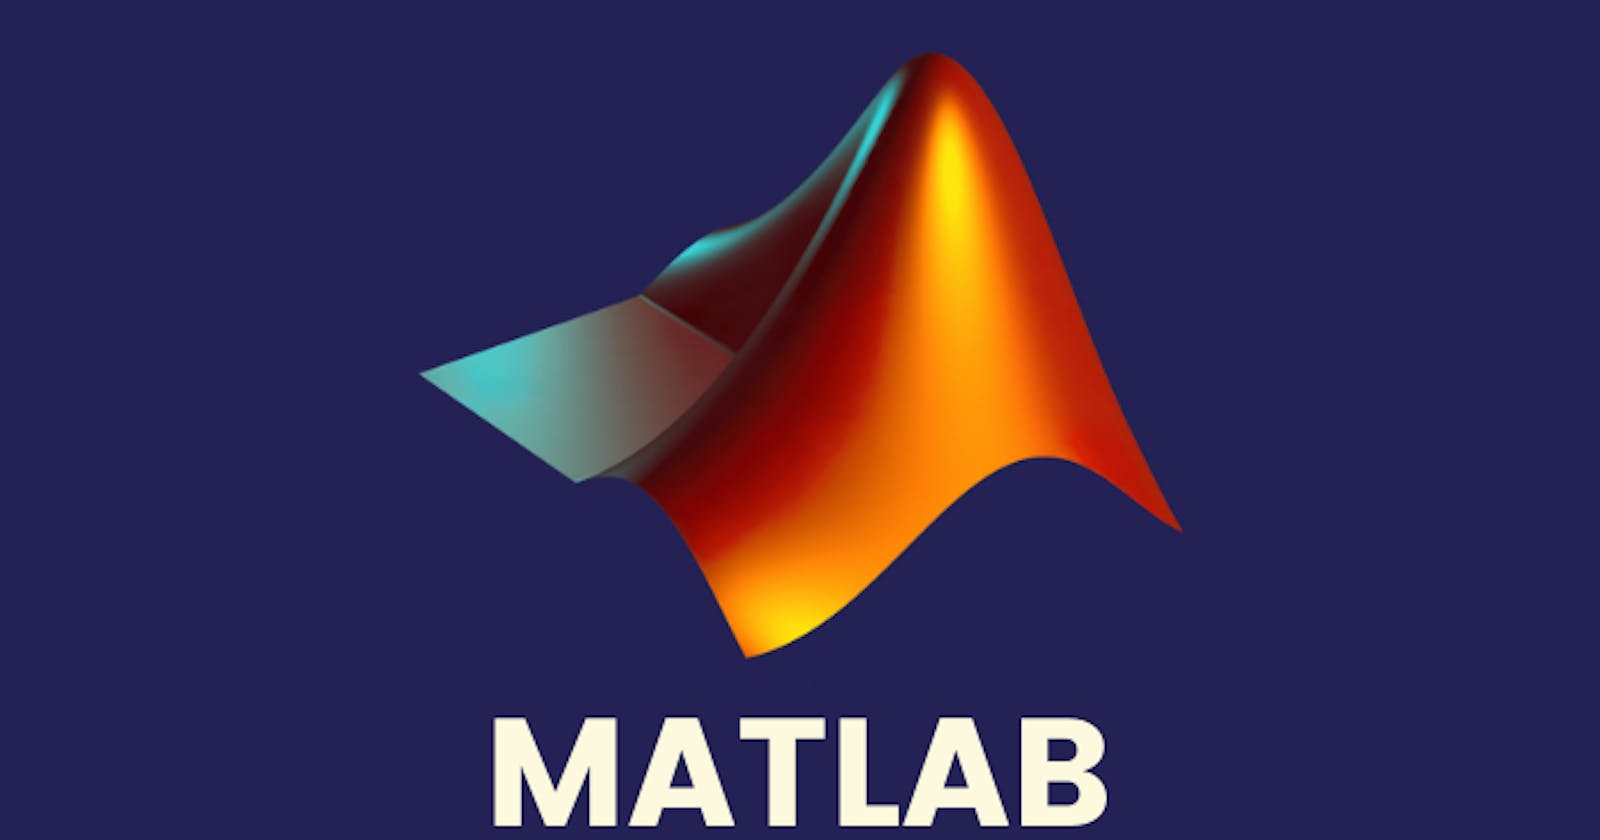 Matlab For Applied Math